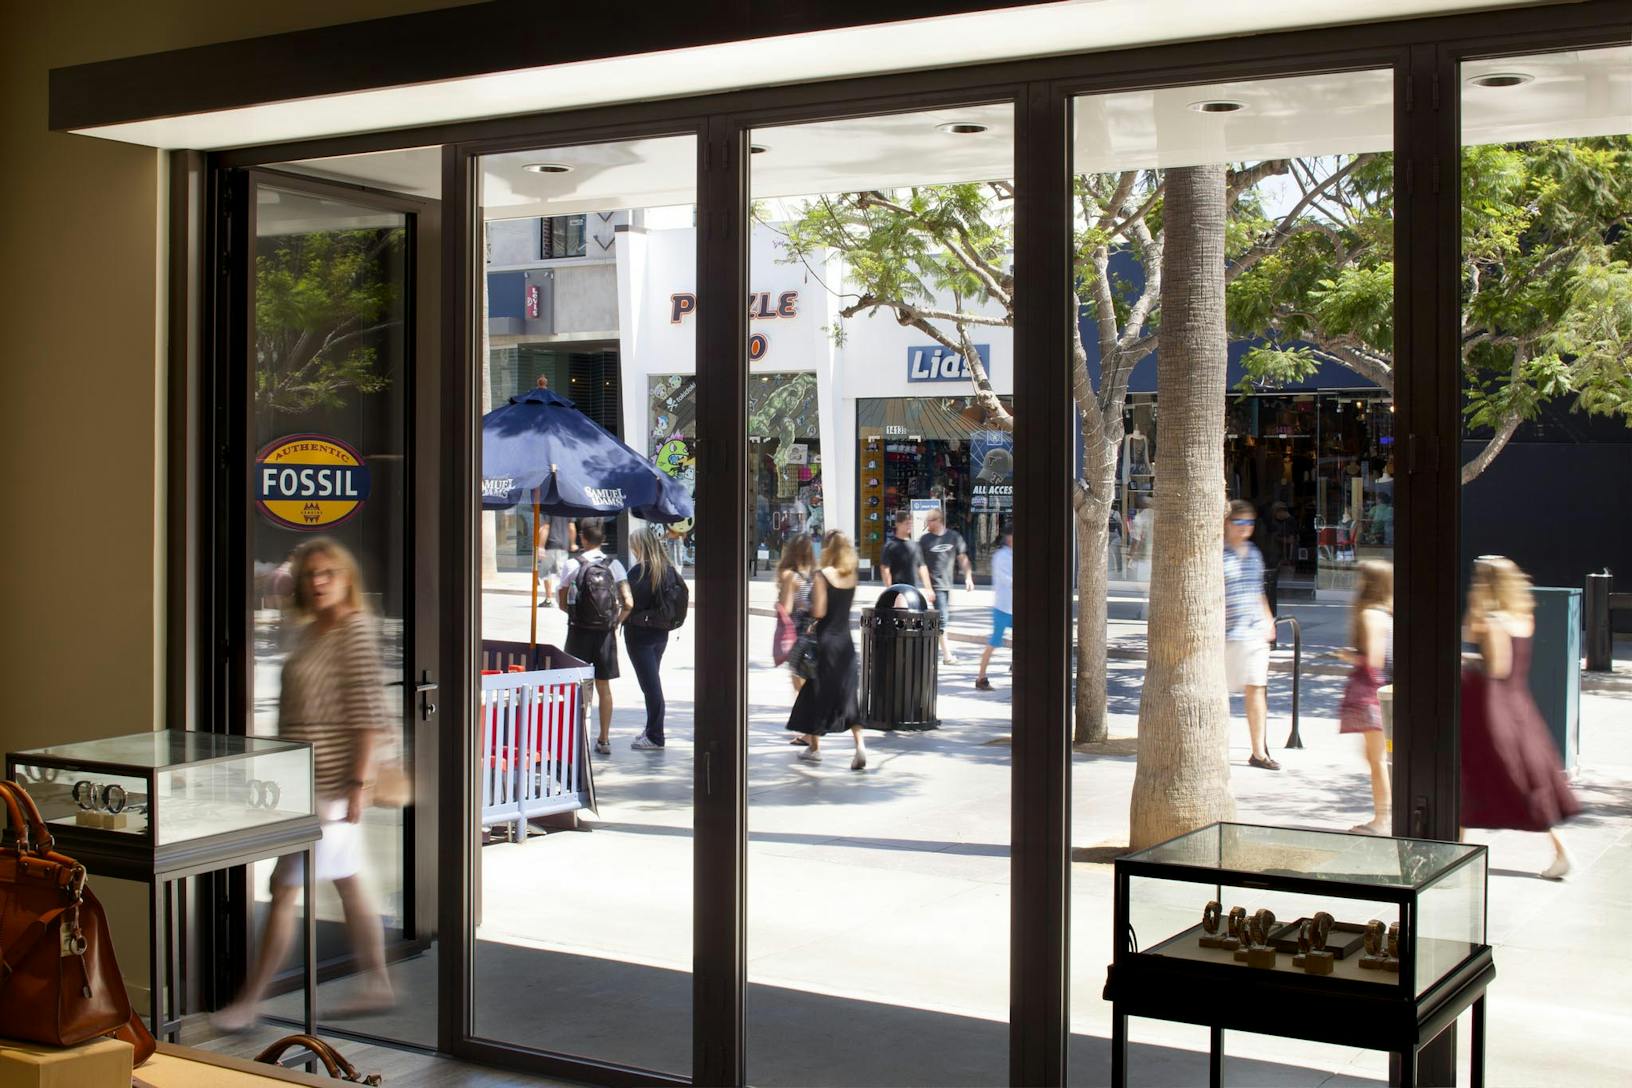 SL70 Retail Folding Entry Doors at the Fossil Store in Santa Monica, CA - Closed Interior Day View